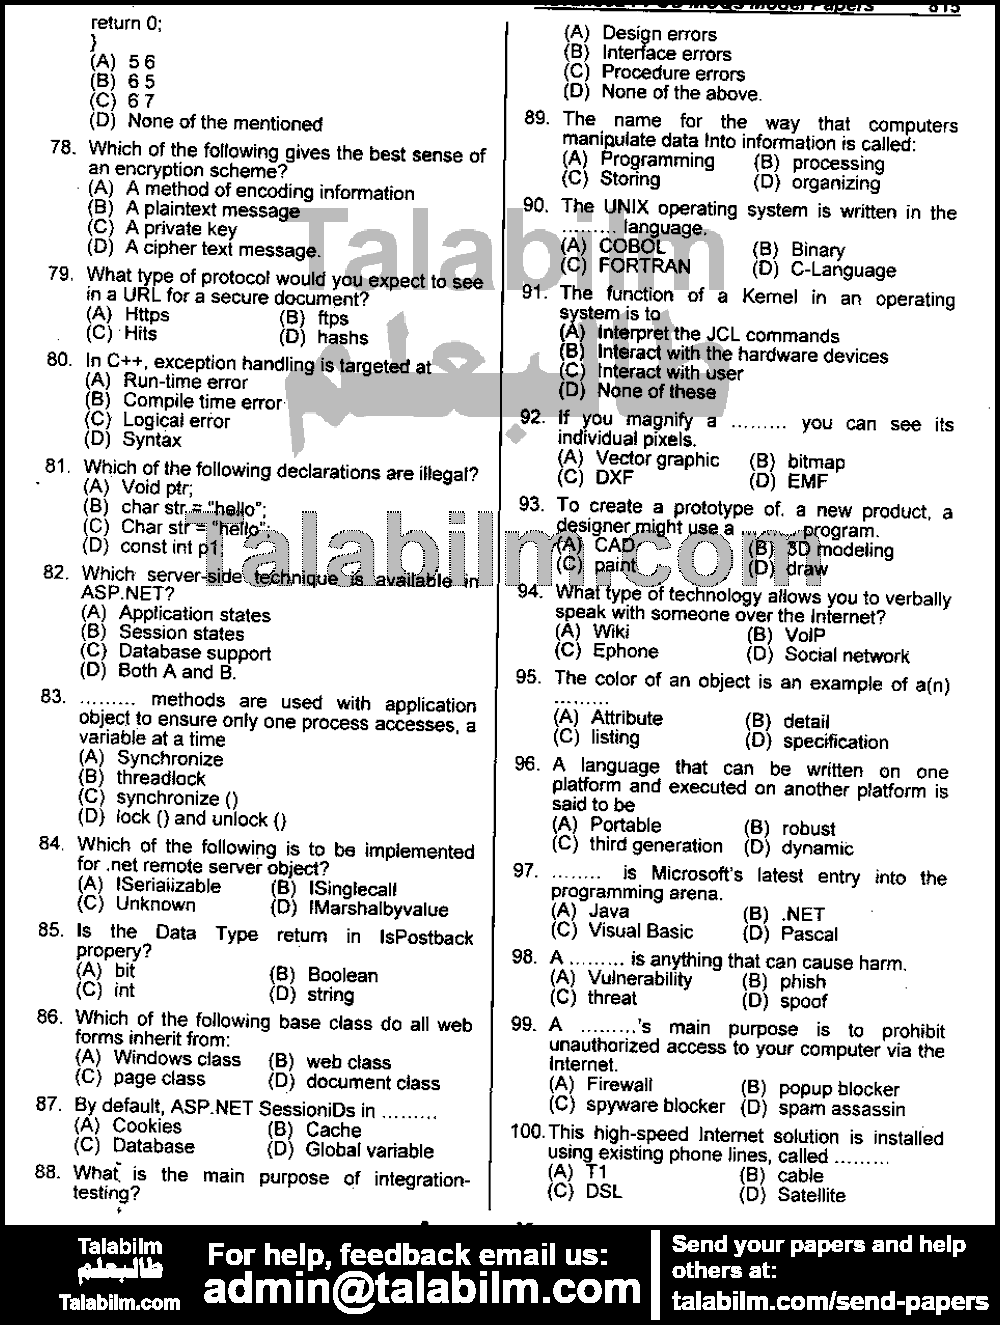 Computer Programmer Or Data Control Officer 0 past paper for 2015 Page No. 5